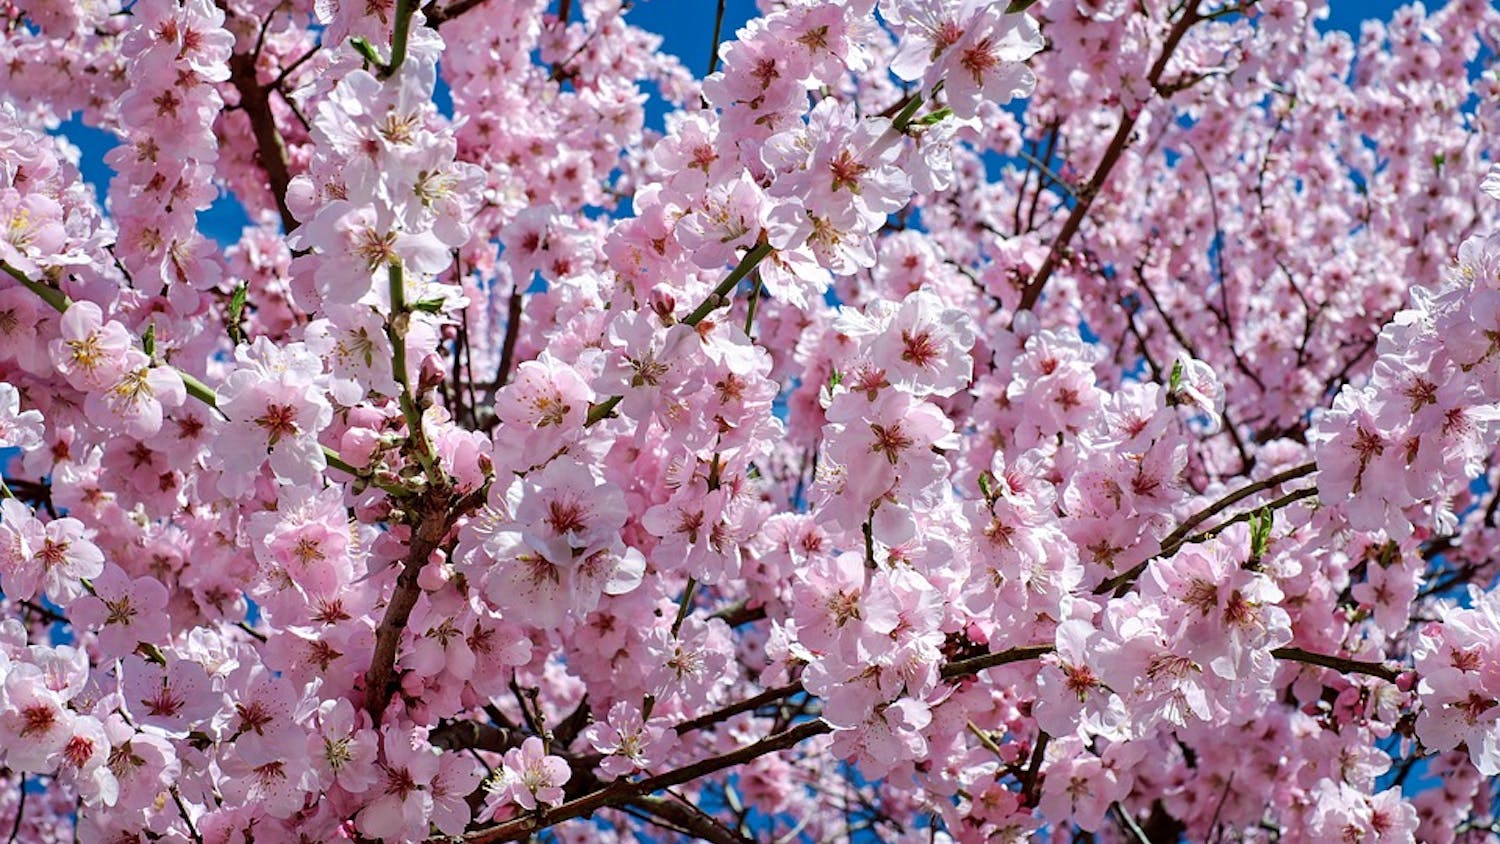 Celebrate cherry blossoms and more this weekend in D.C.